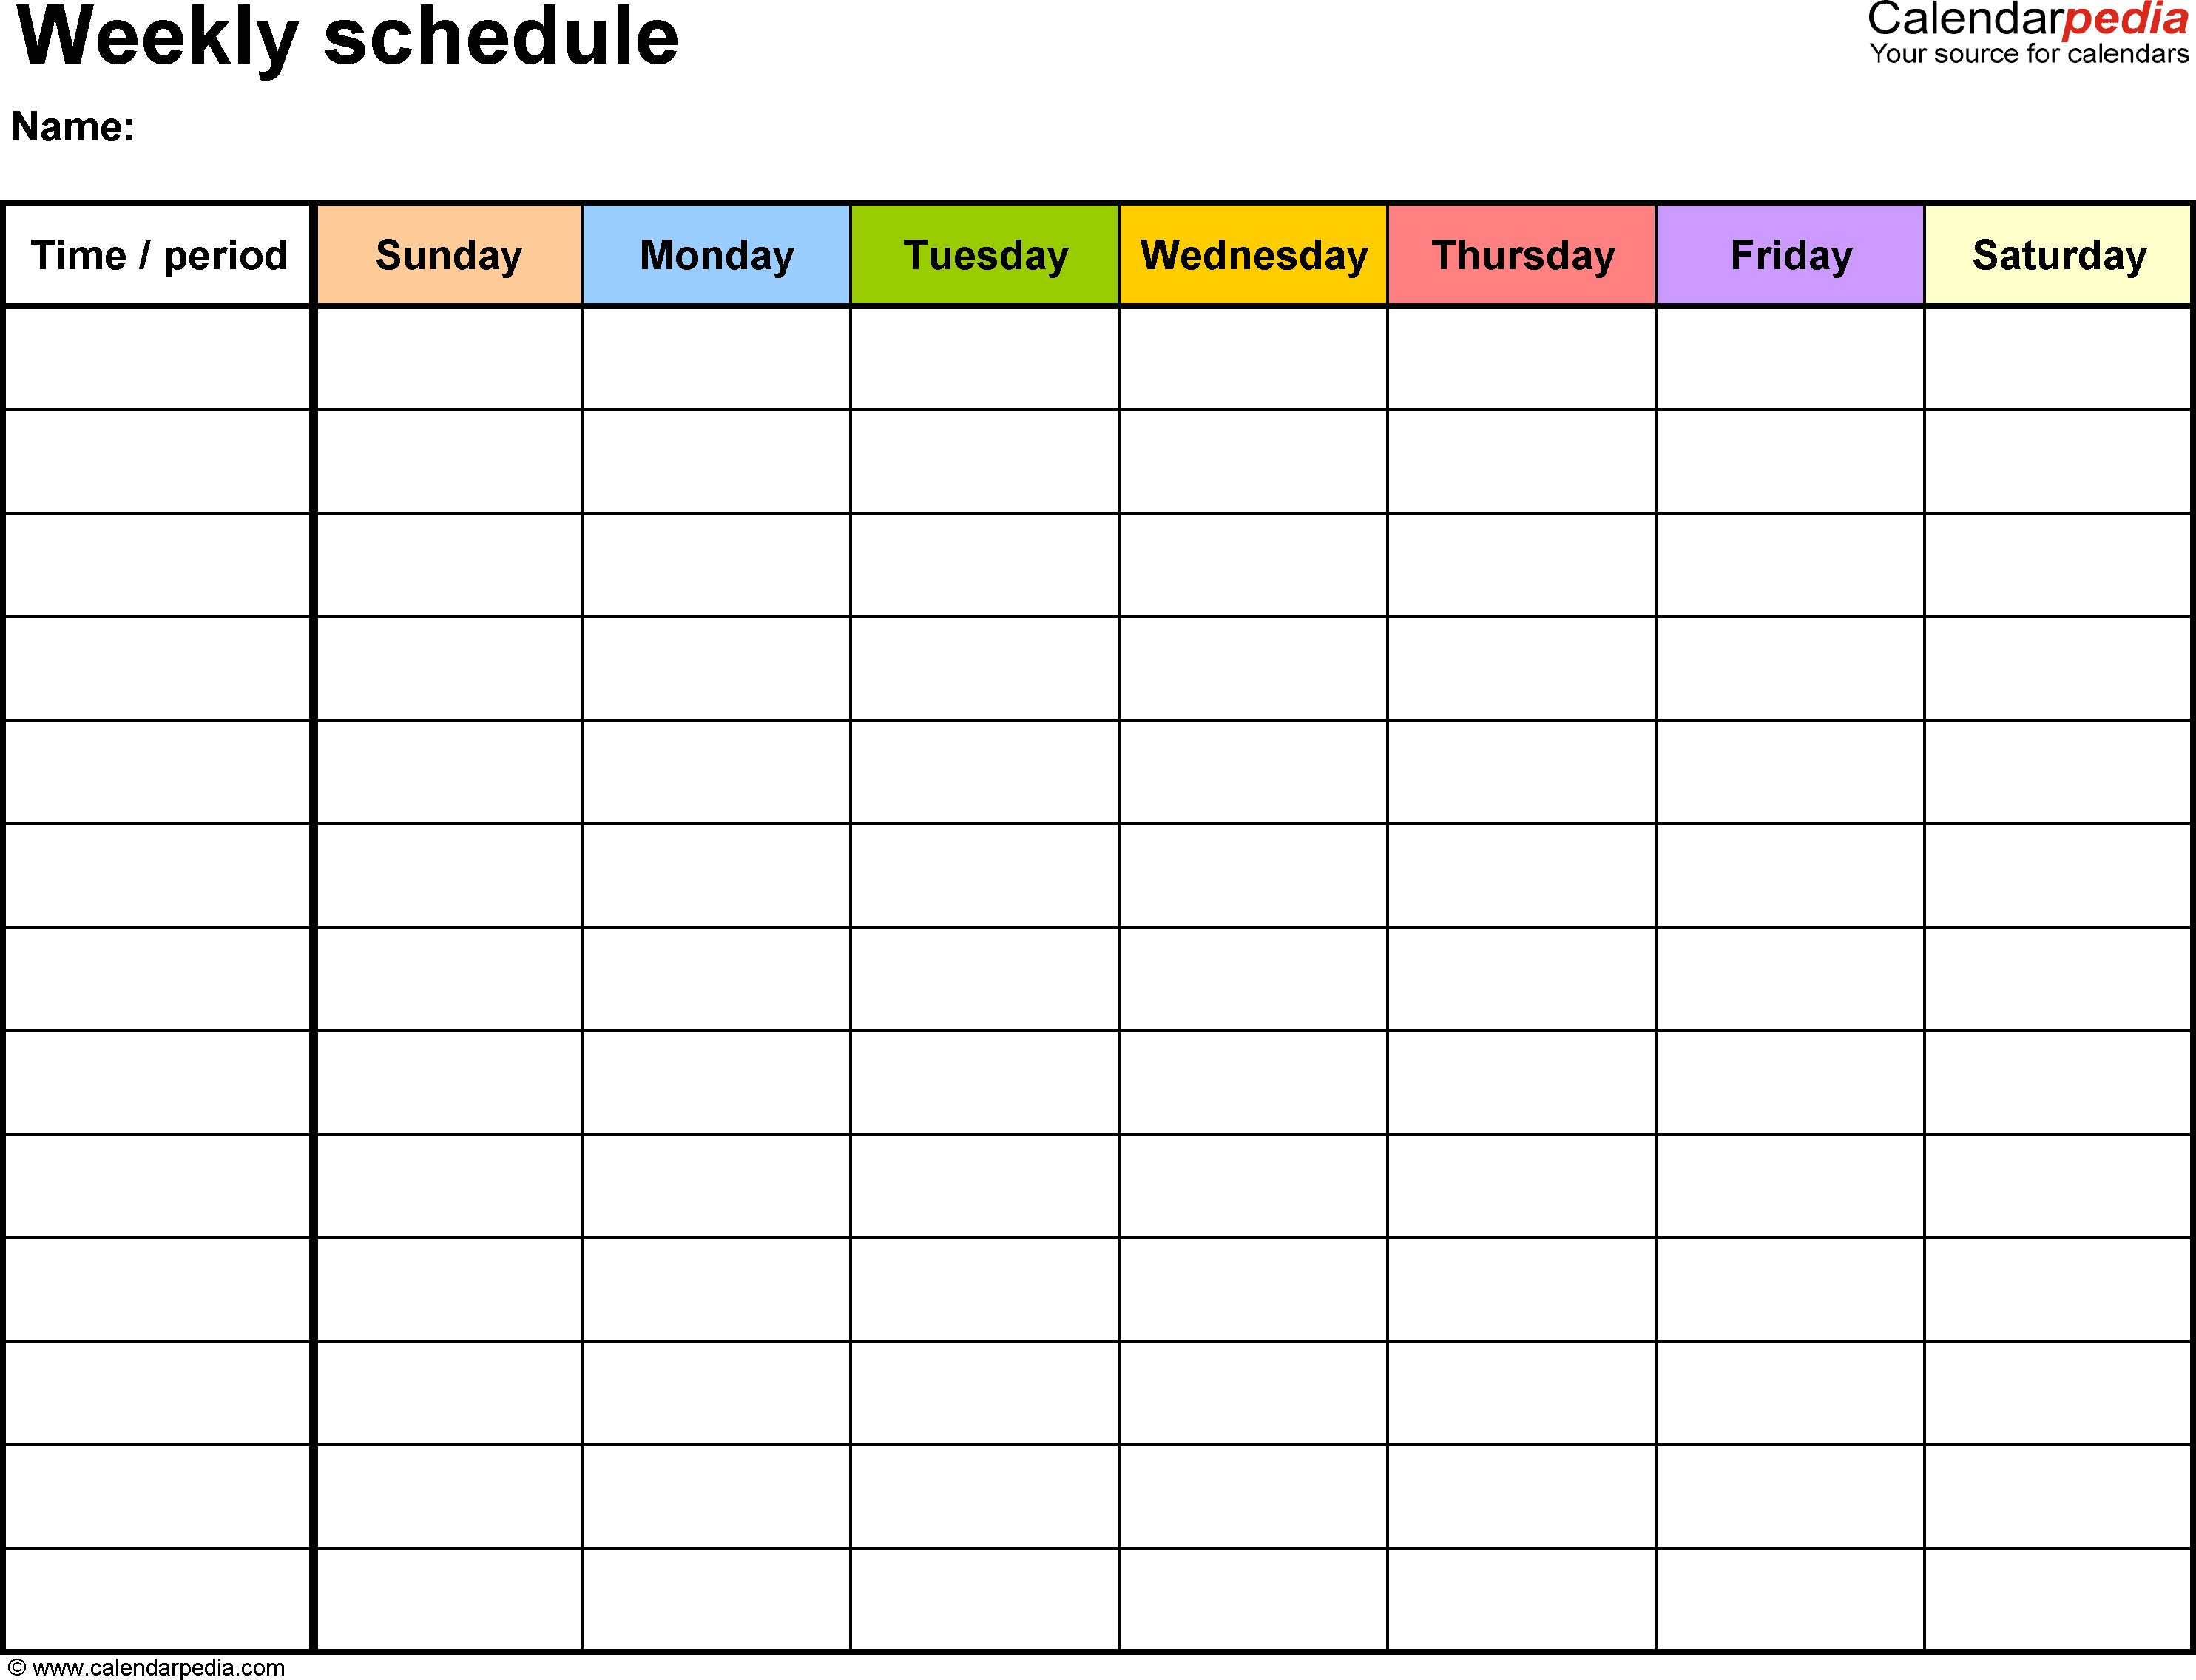 Free Weekly Schedule Templates For Excel - 18 Templates inside Free Monthly Calendar To Edit